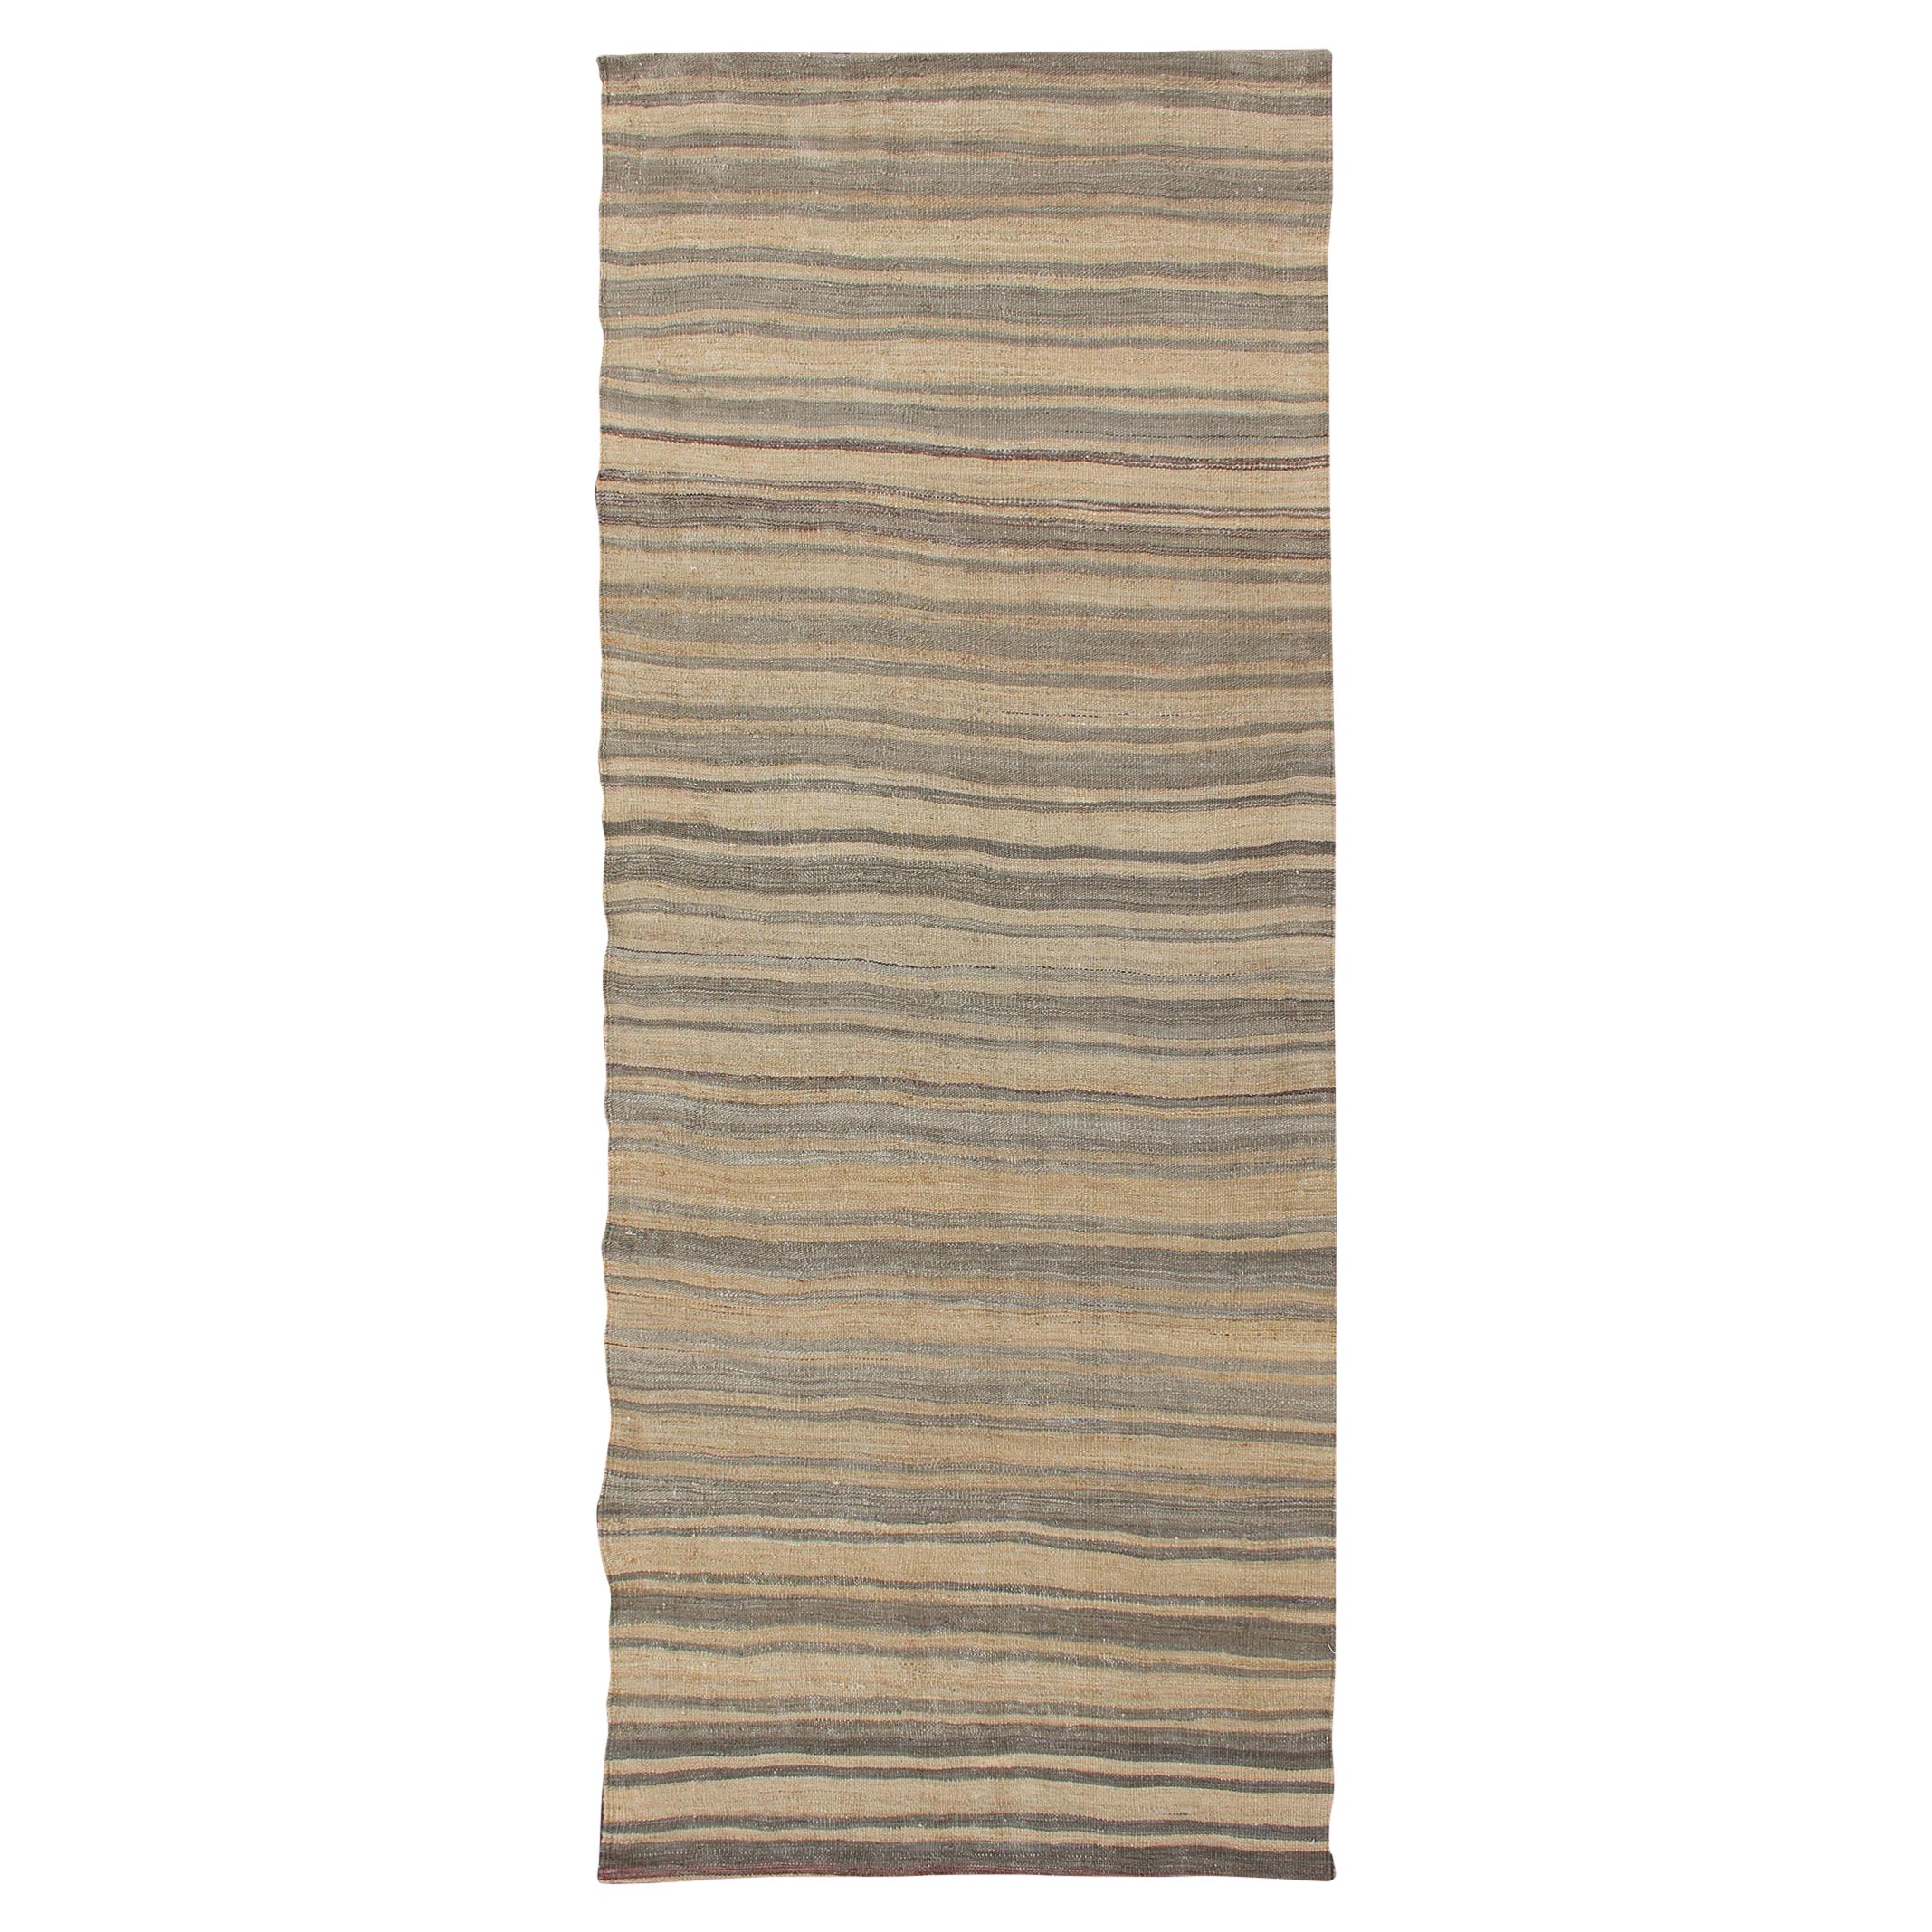 Vintage Turkish Kilim Runner with Stripes in Light Tan and Neutral Tones For Sale